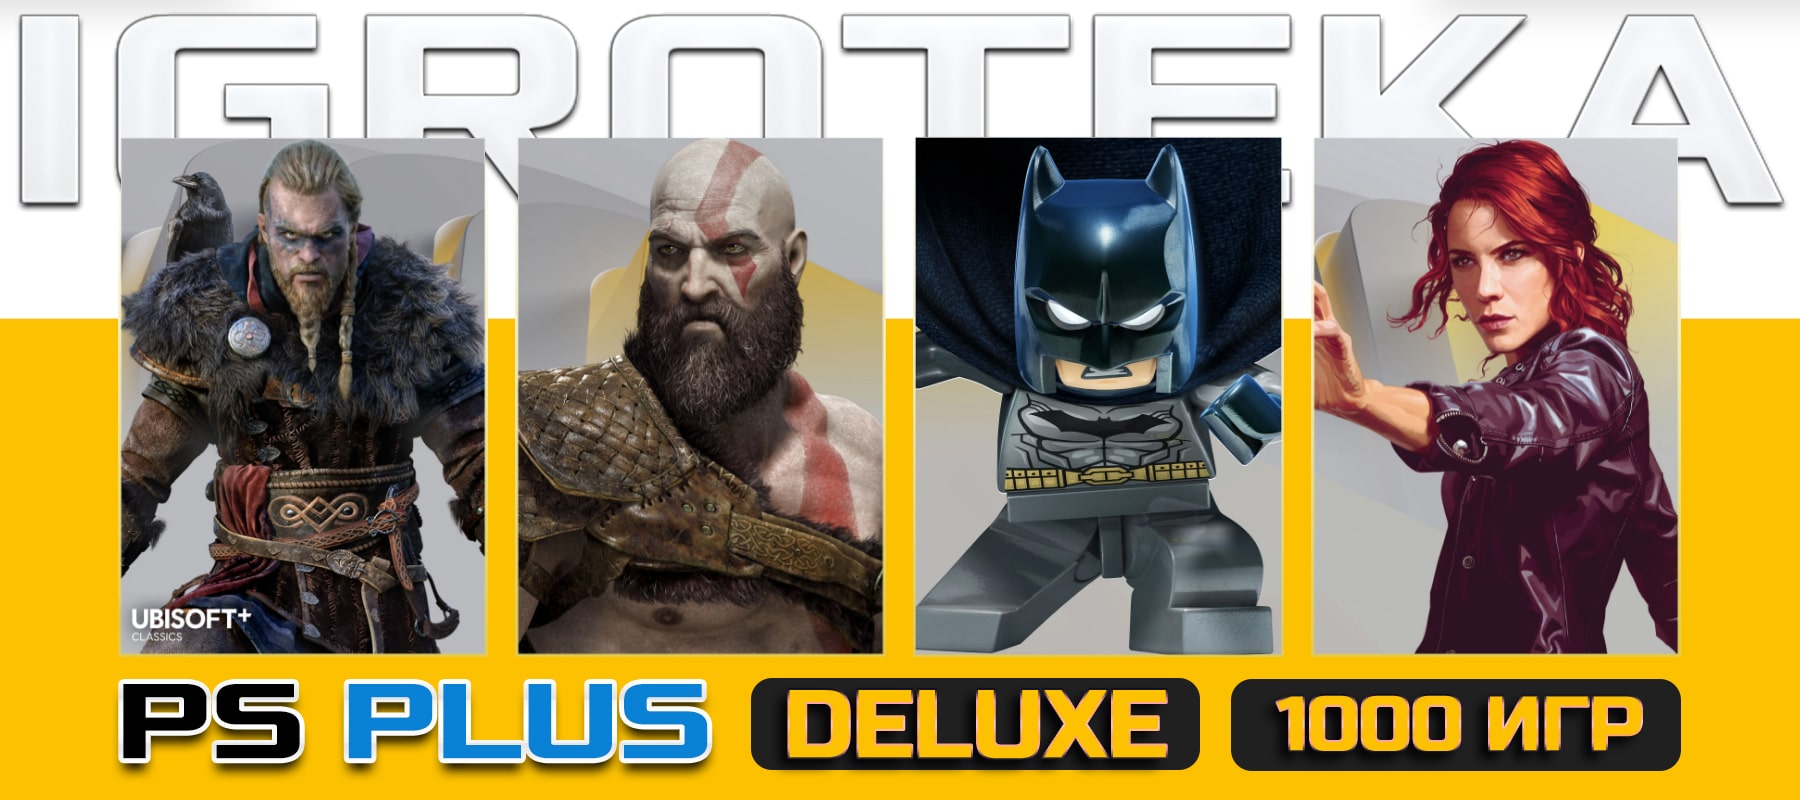 PS Plus Deluxe image